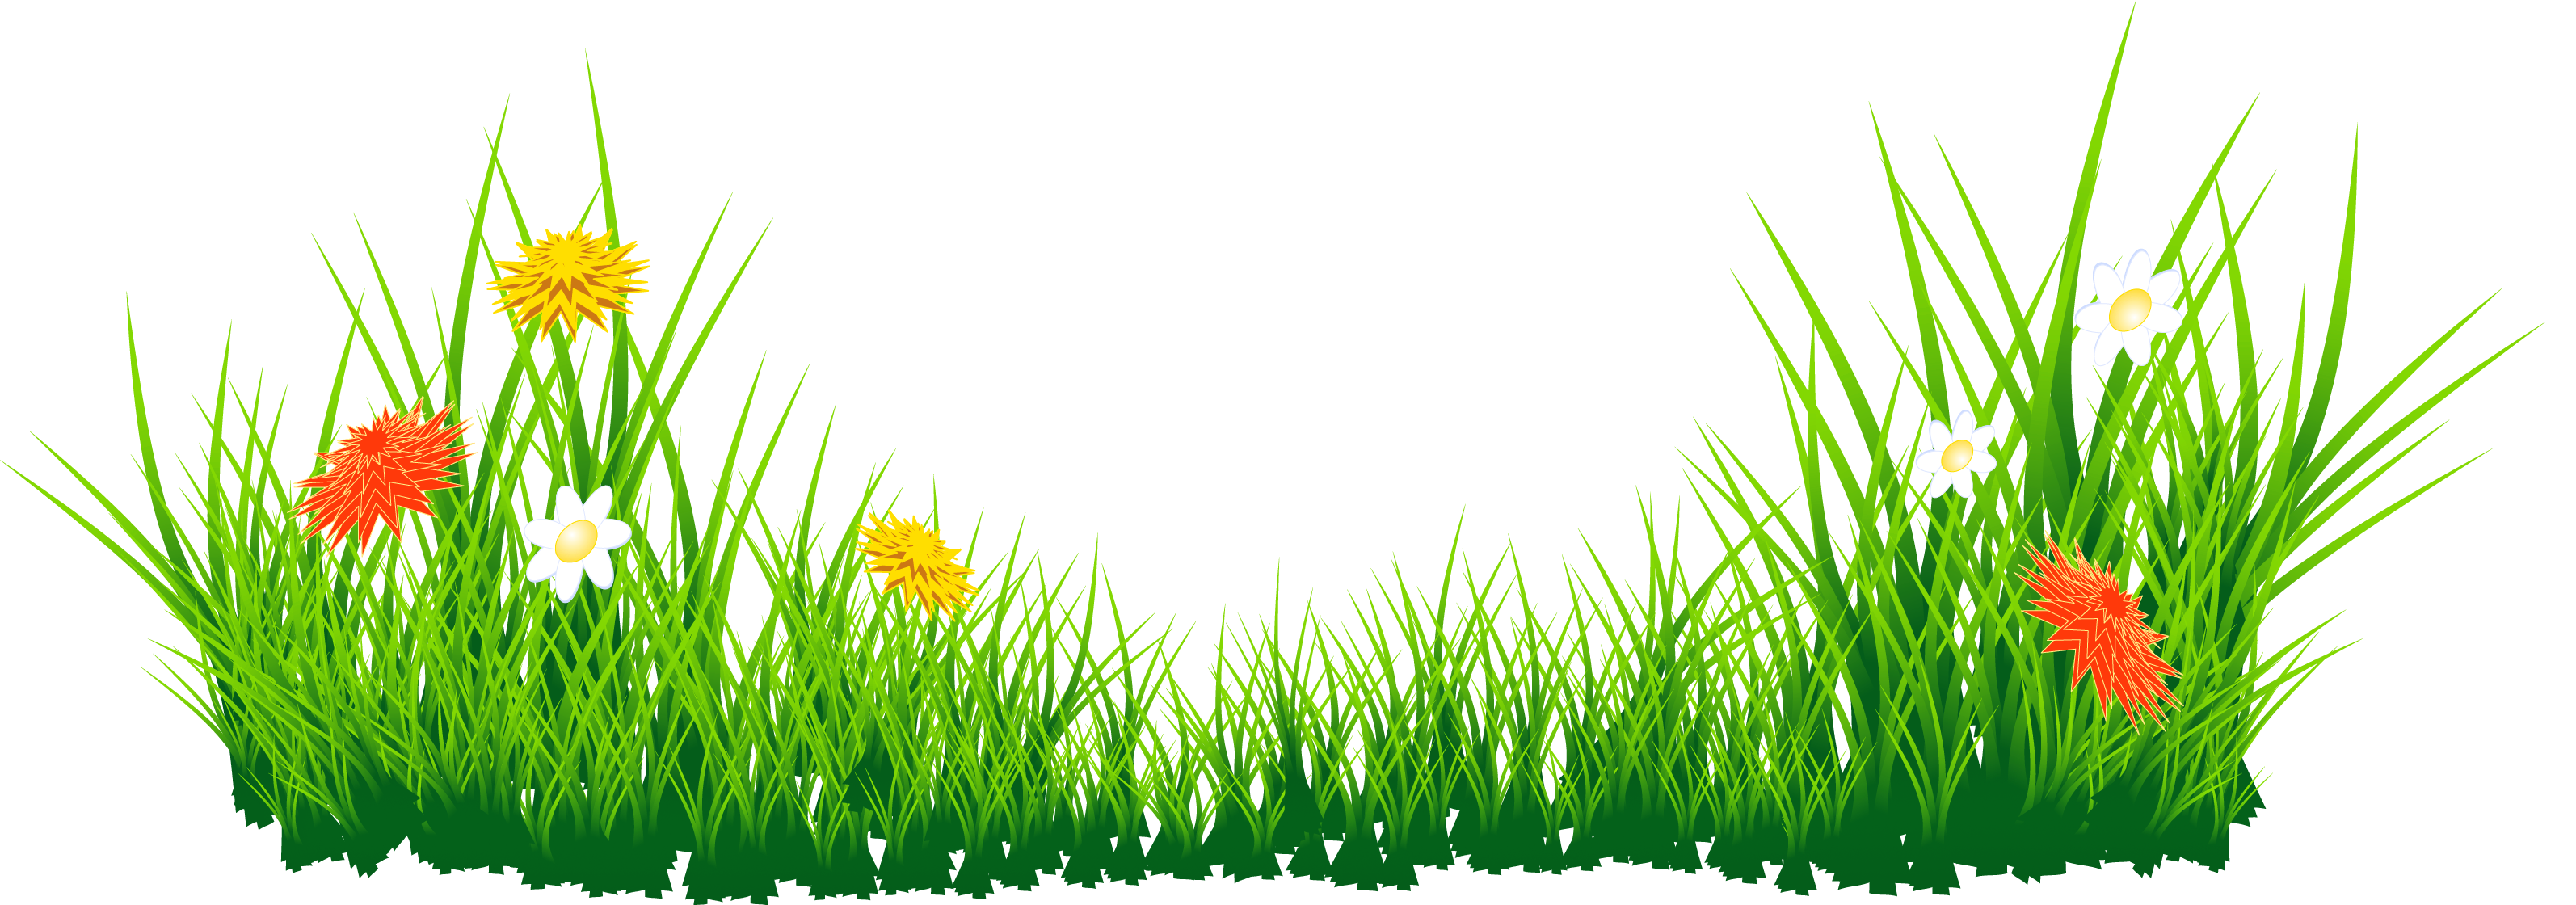 png clipart grass - photo #11